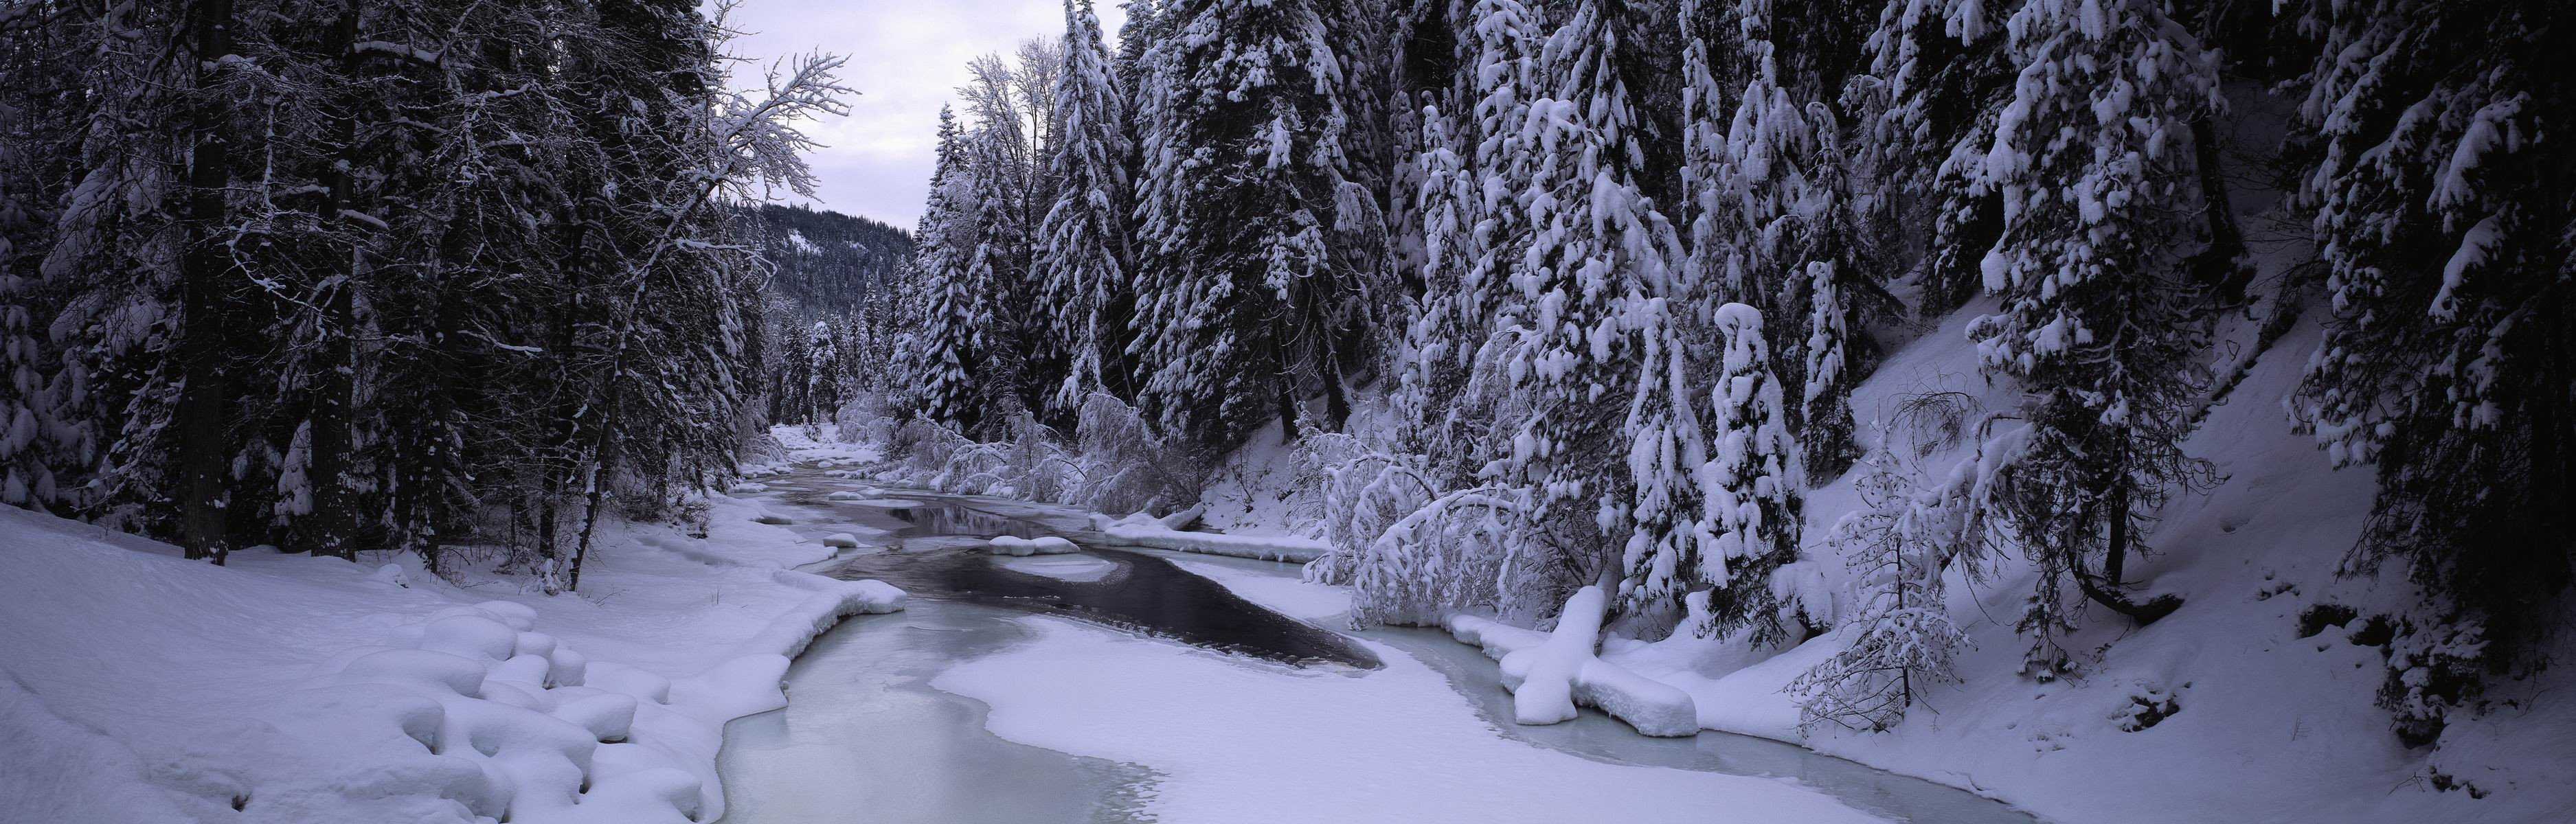 General 3750x1200 landscape ice river snow forest nature